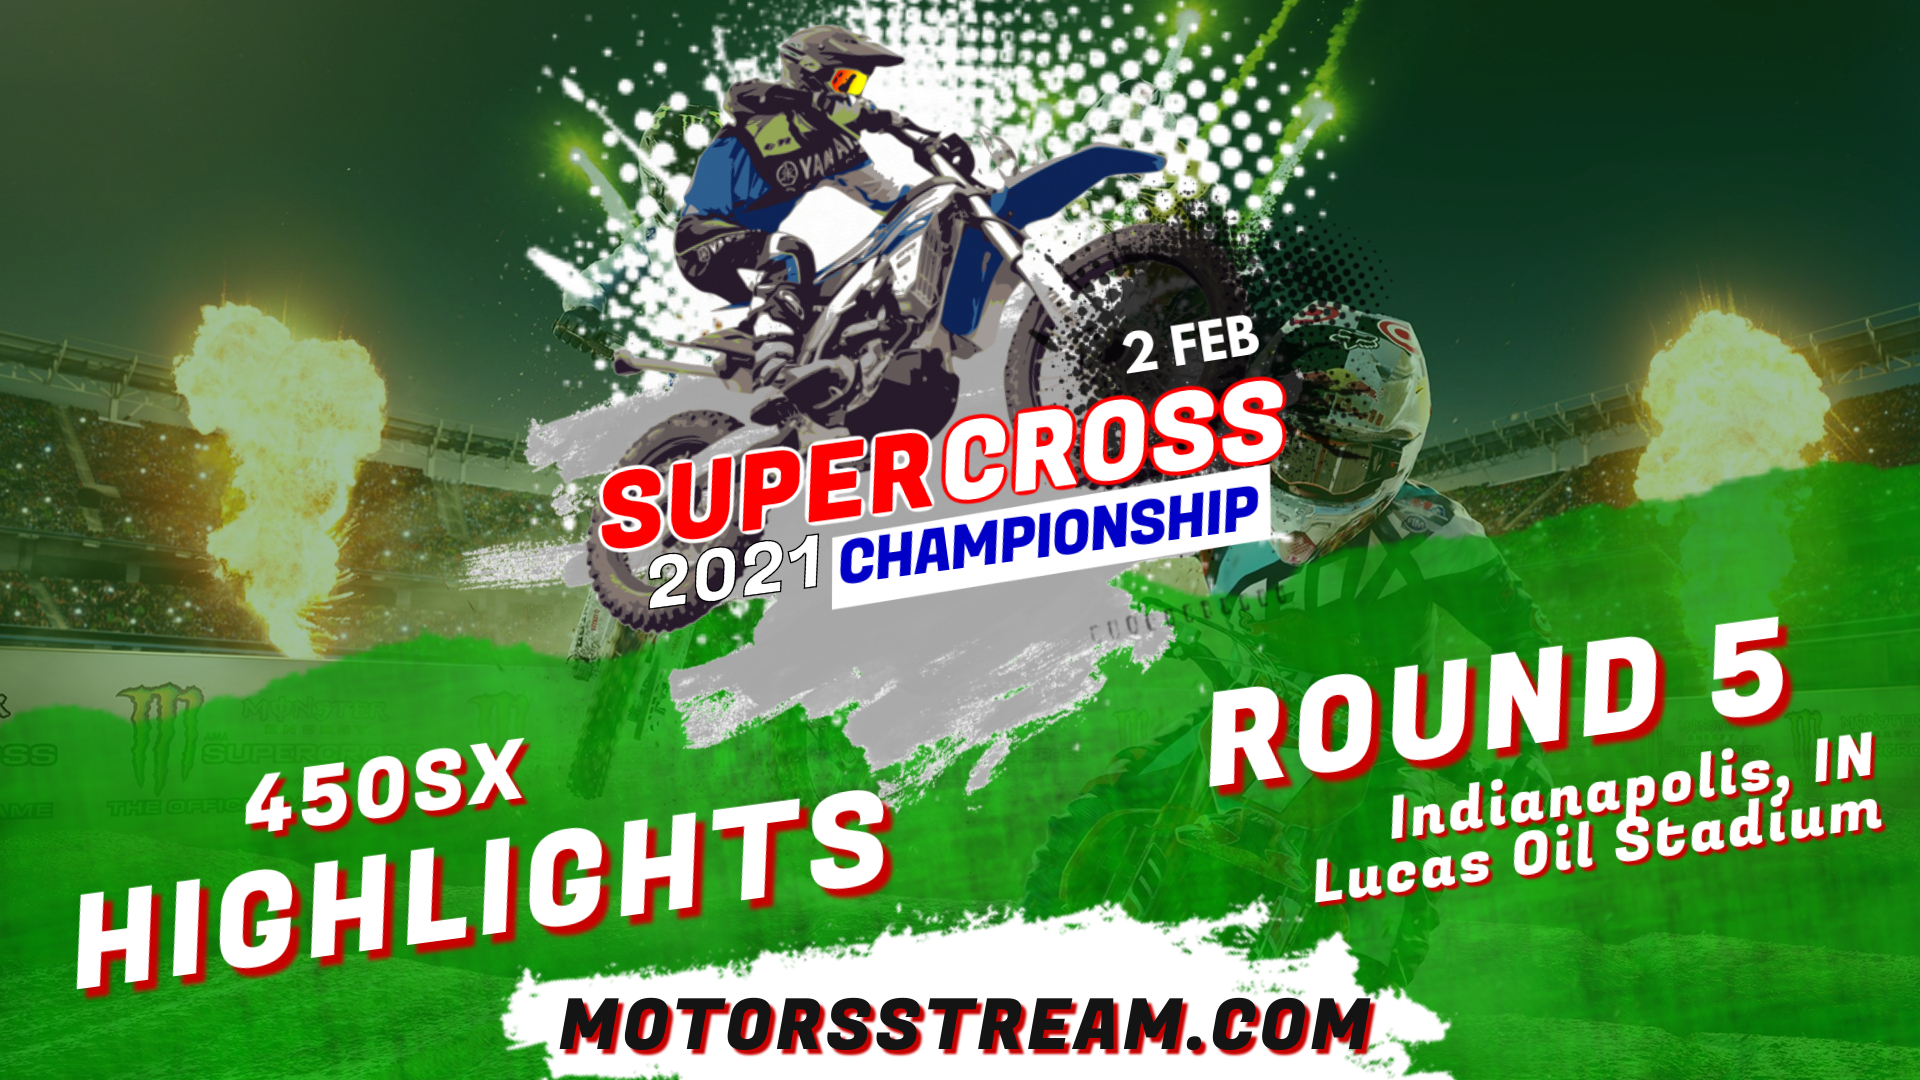 Supercross Round 5 Indianapolis 450SX Highlights 2021